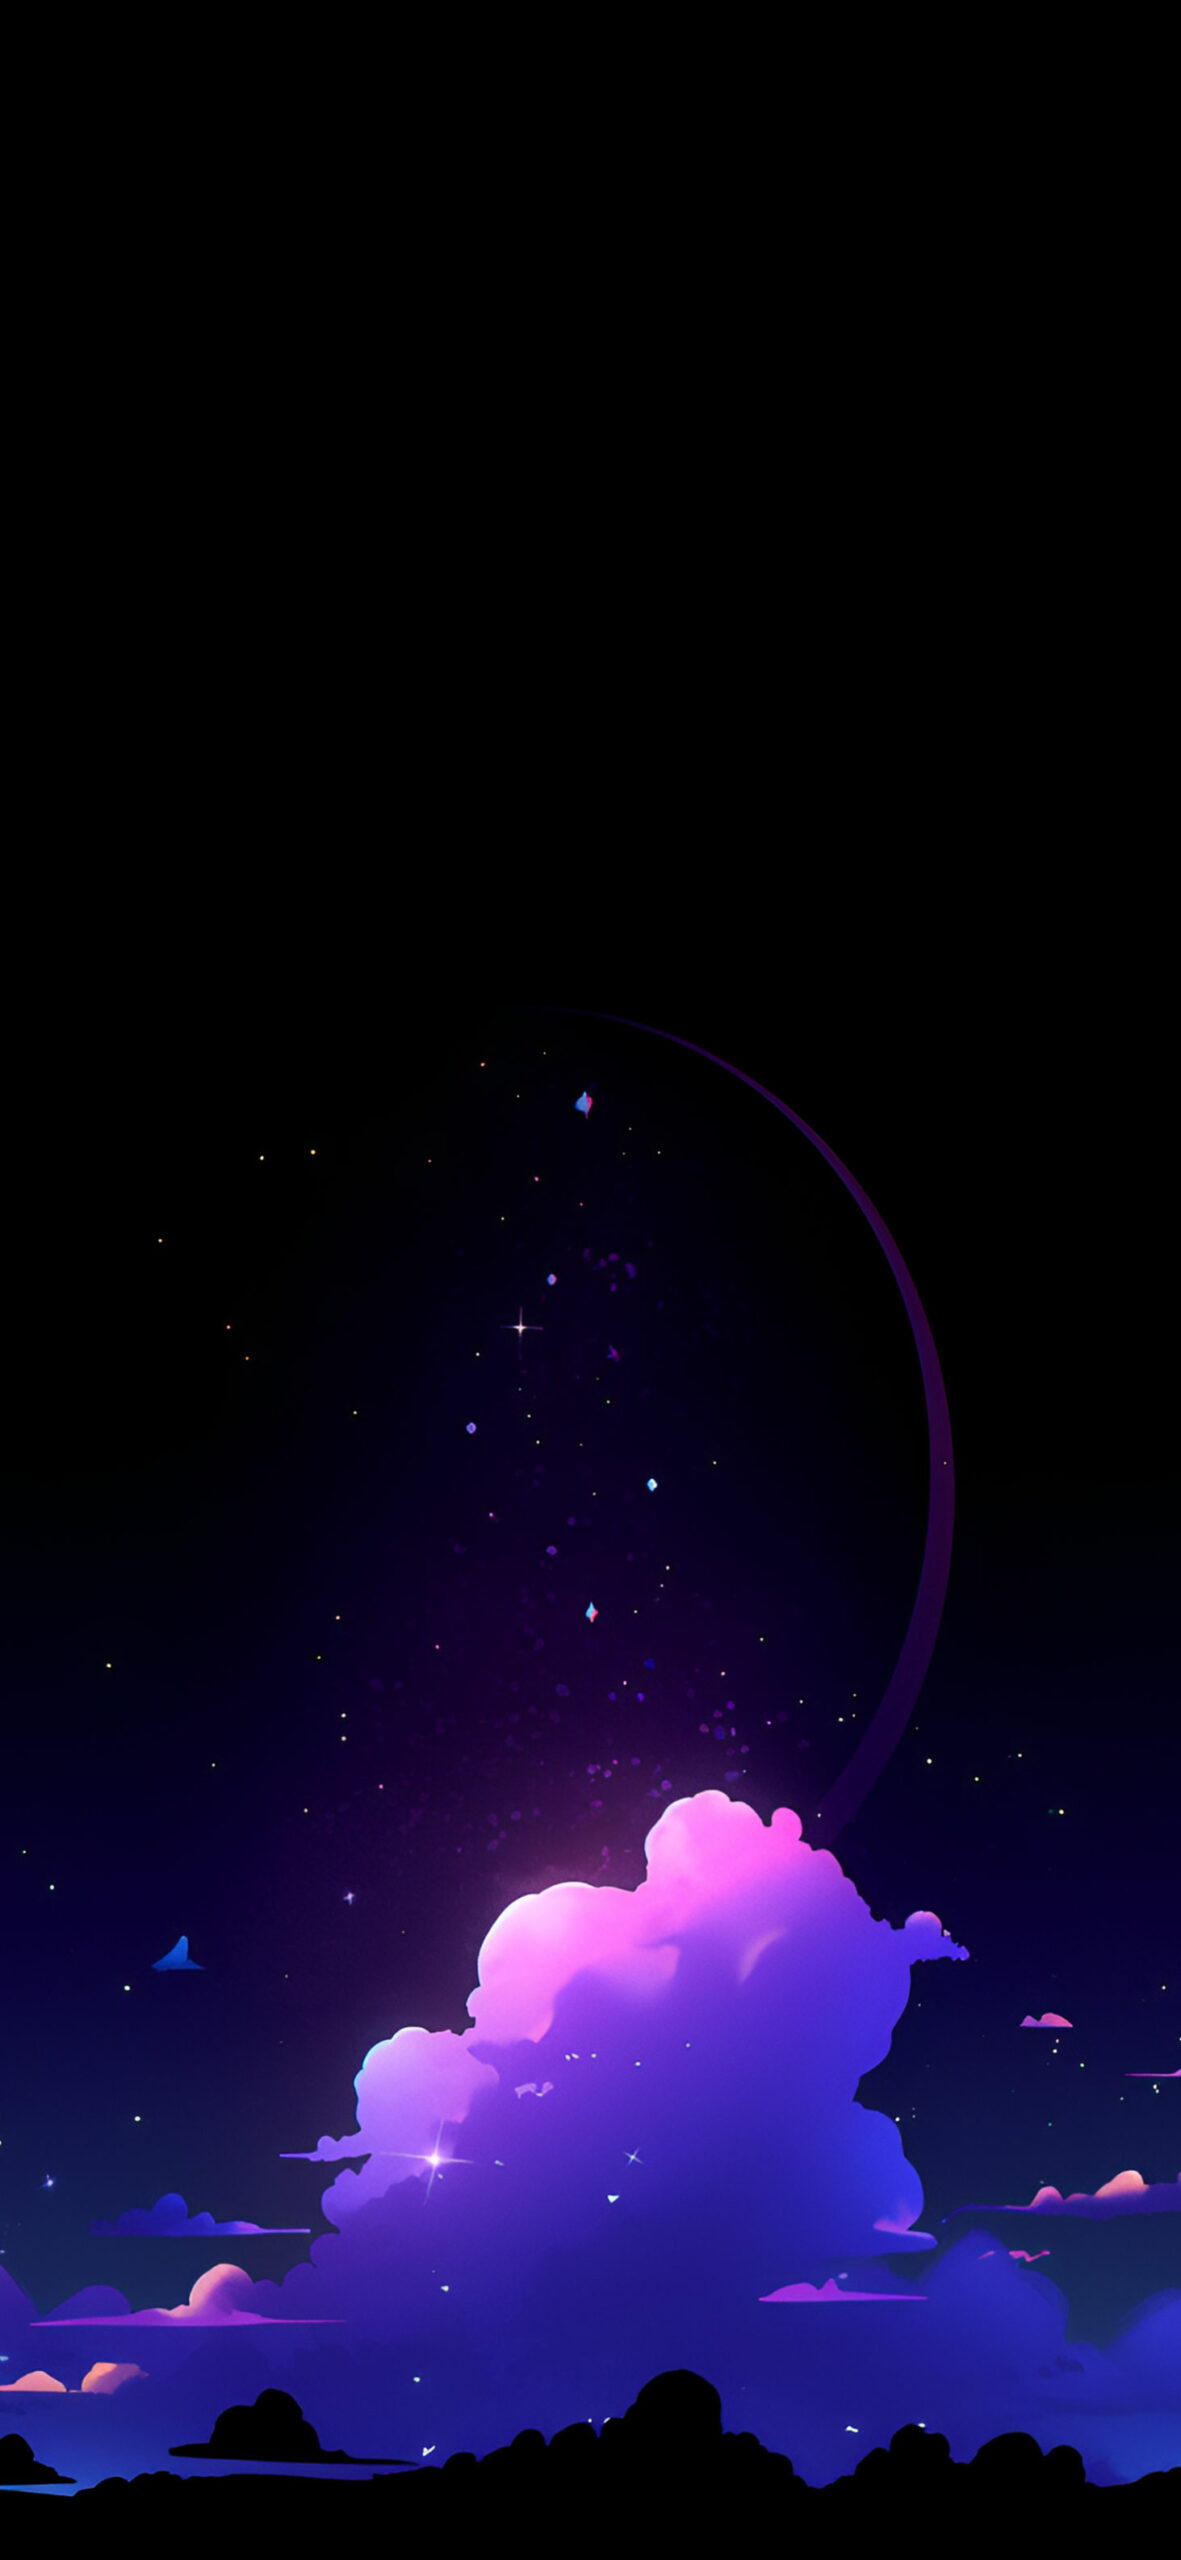 Young moon & clouds in the starry sky wallpaper Aesthetic nigh